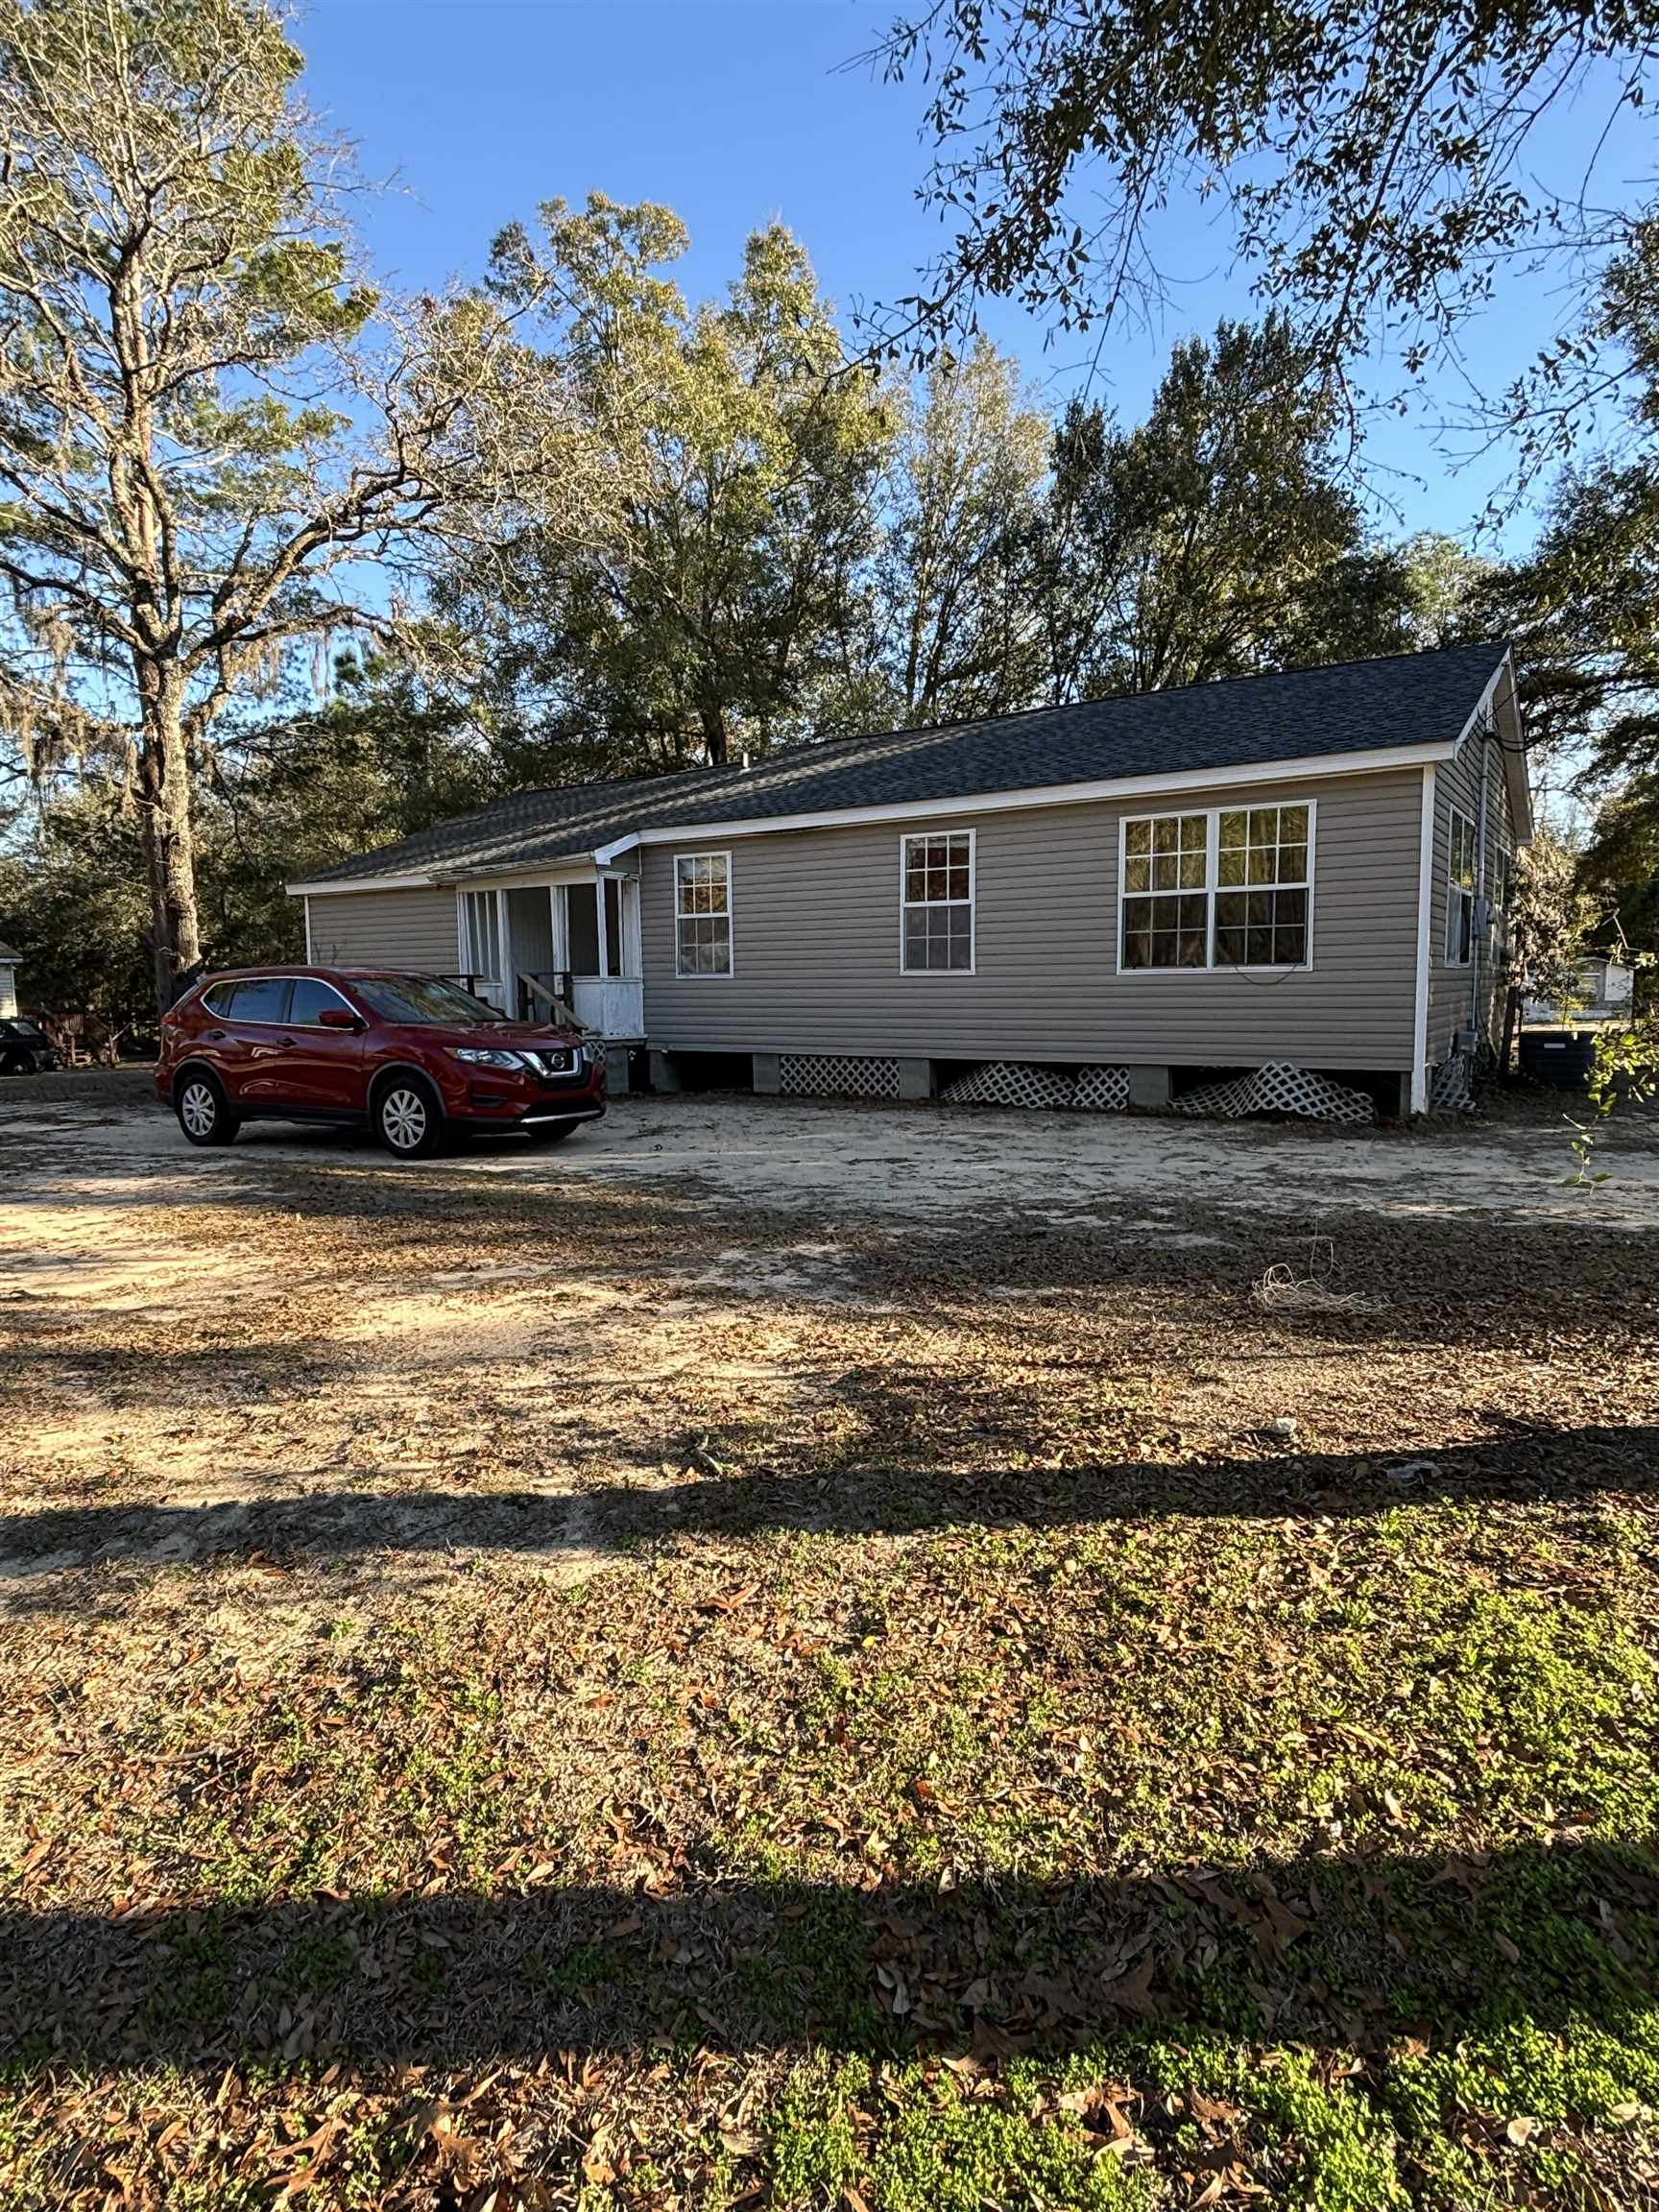 1221-1213 My Oh My,TALLAHASSEE,Florida 32305,8 Bedrooms Bedrooms,2 BathroomsBathrooms,Multi-family,My Oh My,368828